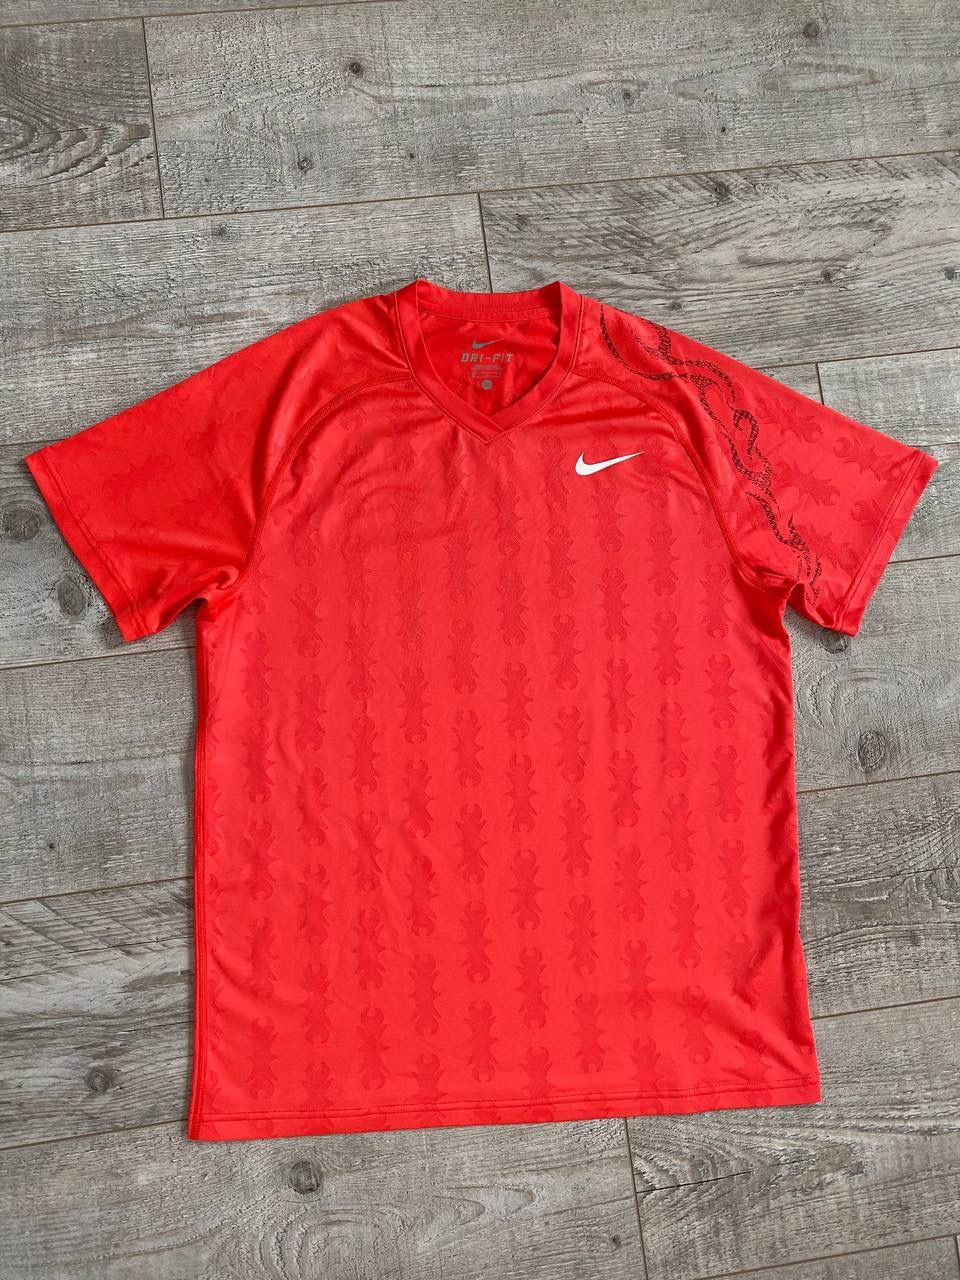 Pre-owned Nike Dri-fit T-shirt Size Medium In Red